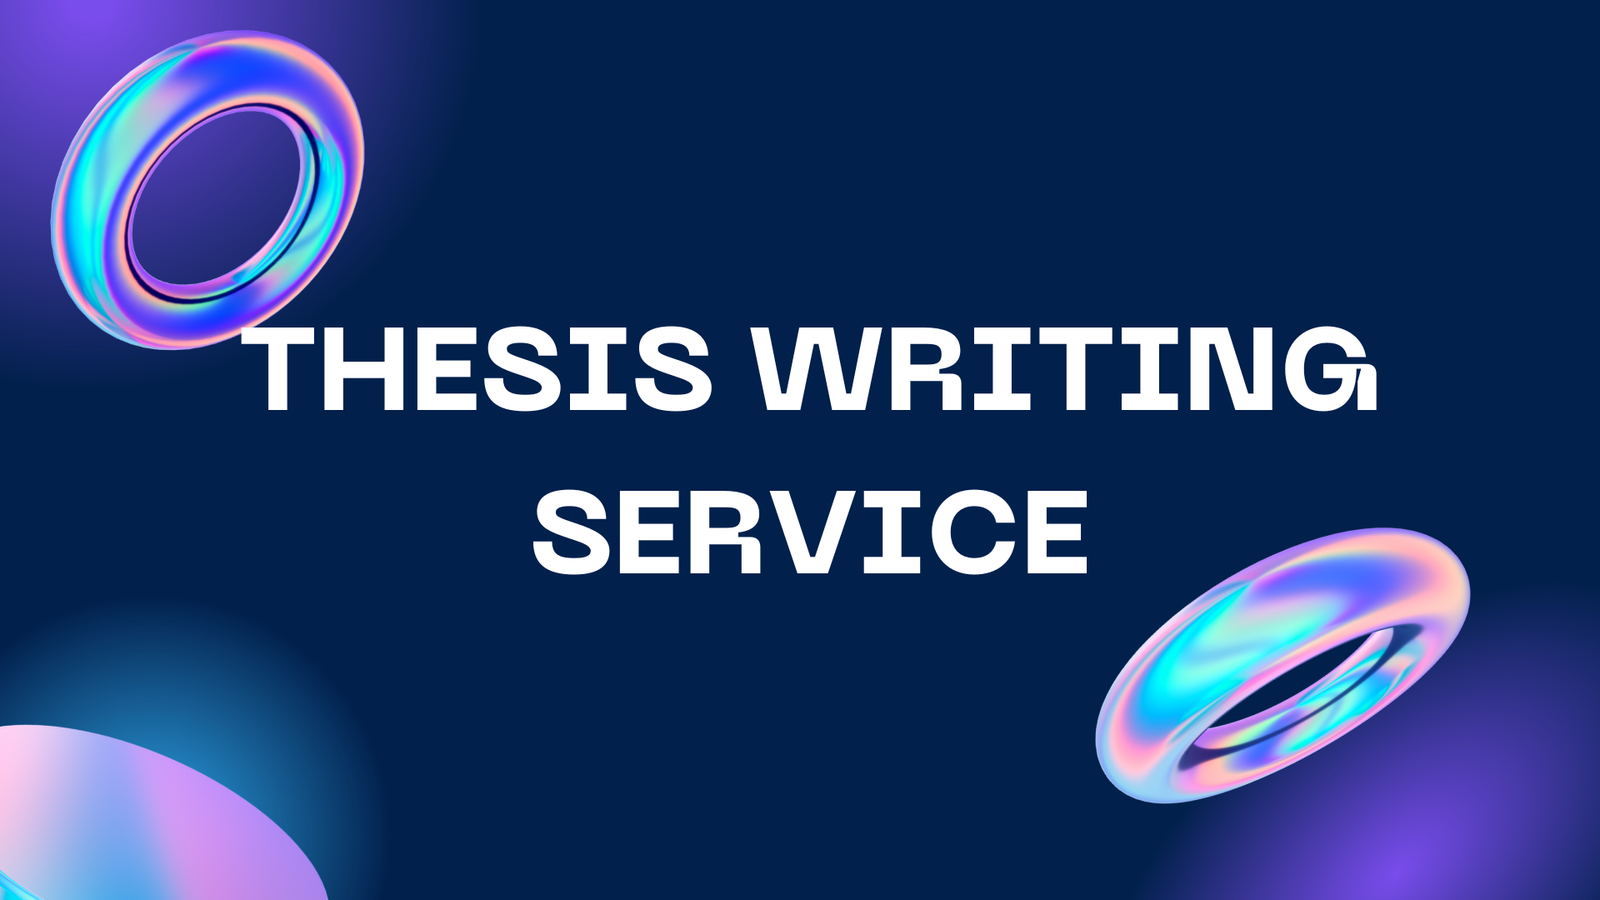 Thesis Writing Service